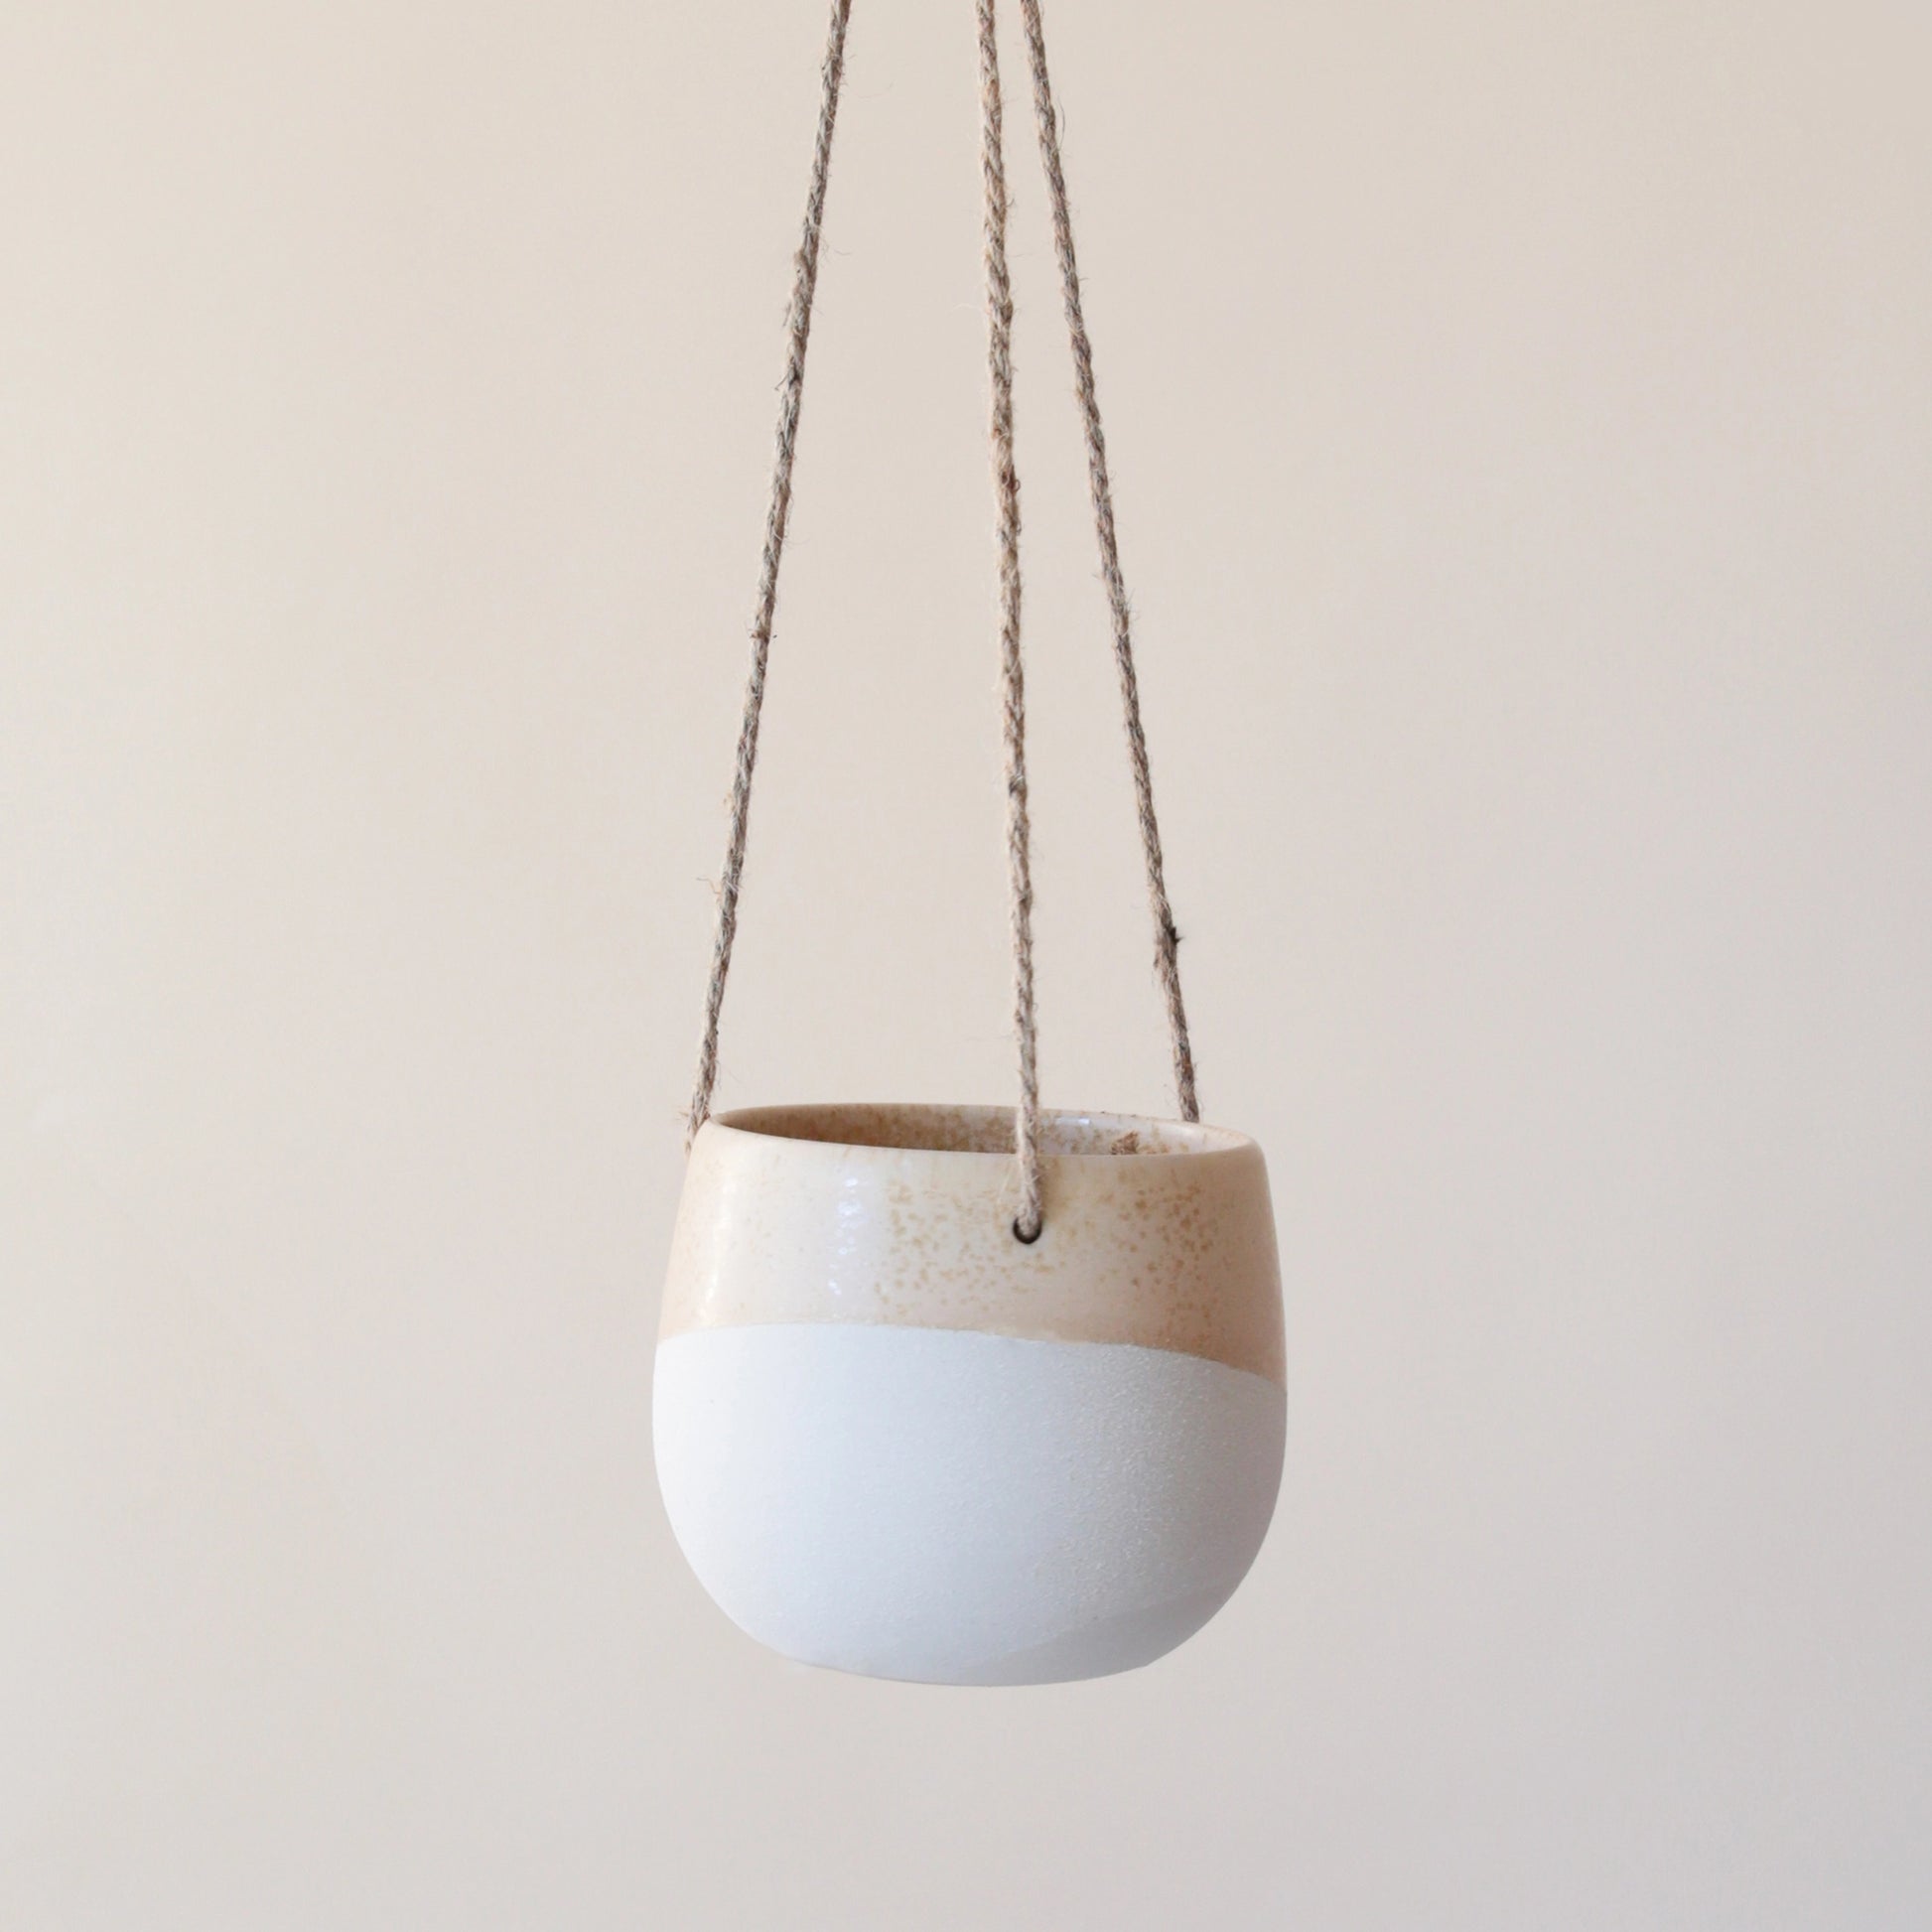 The smaller  neutral ceramic hanging planter with rounded sides and a flat bottom along with a half cream half tan design and three jute strings as the hangers.